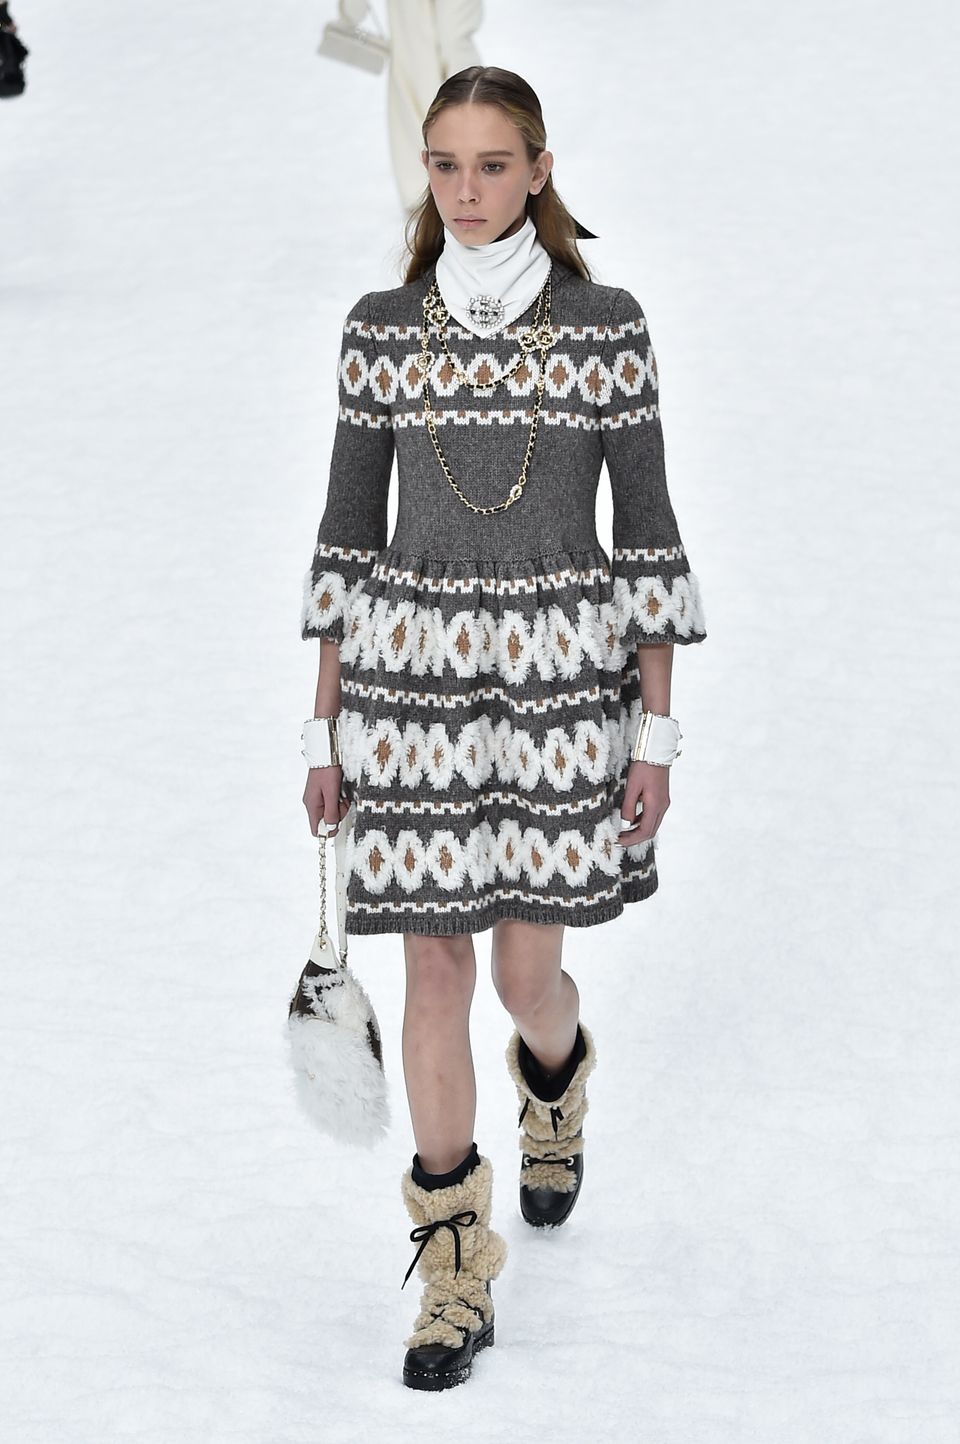 Karl Lagerfeld's Final Chanel Show: See All The Photos | HuffPost Life